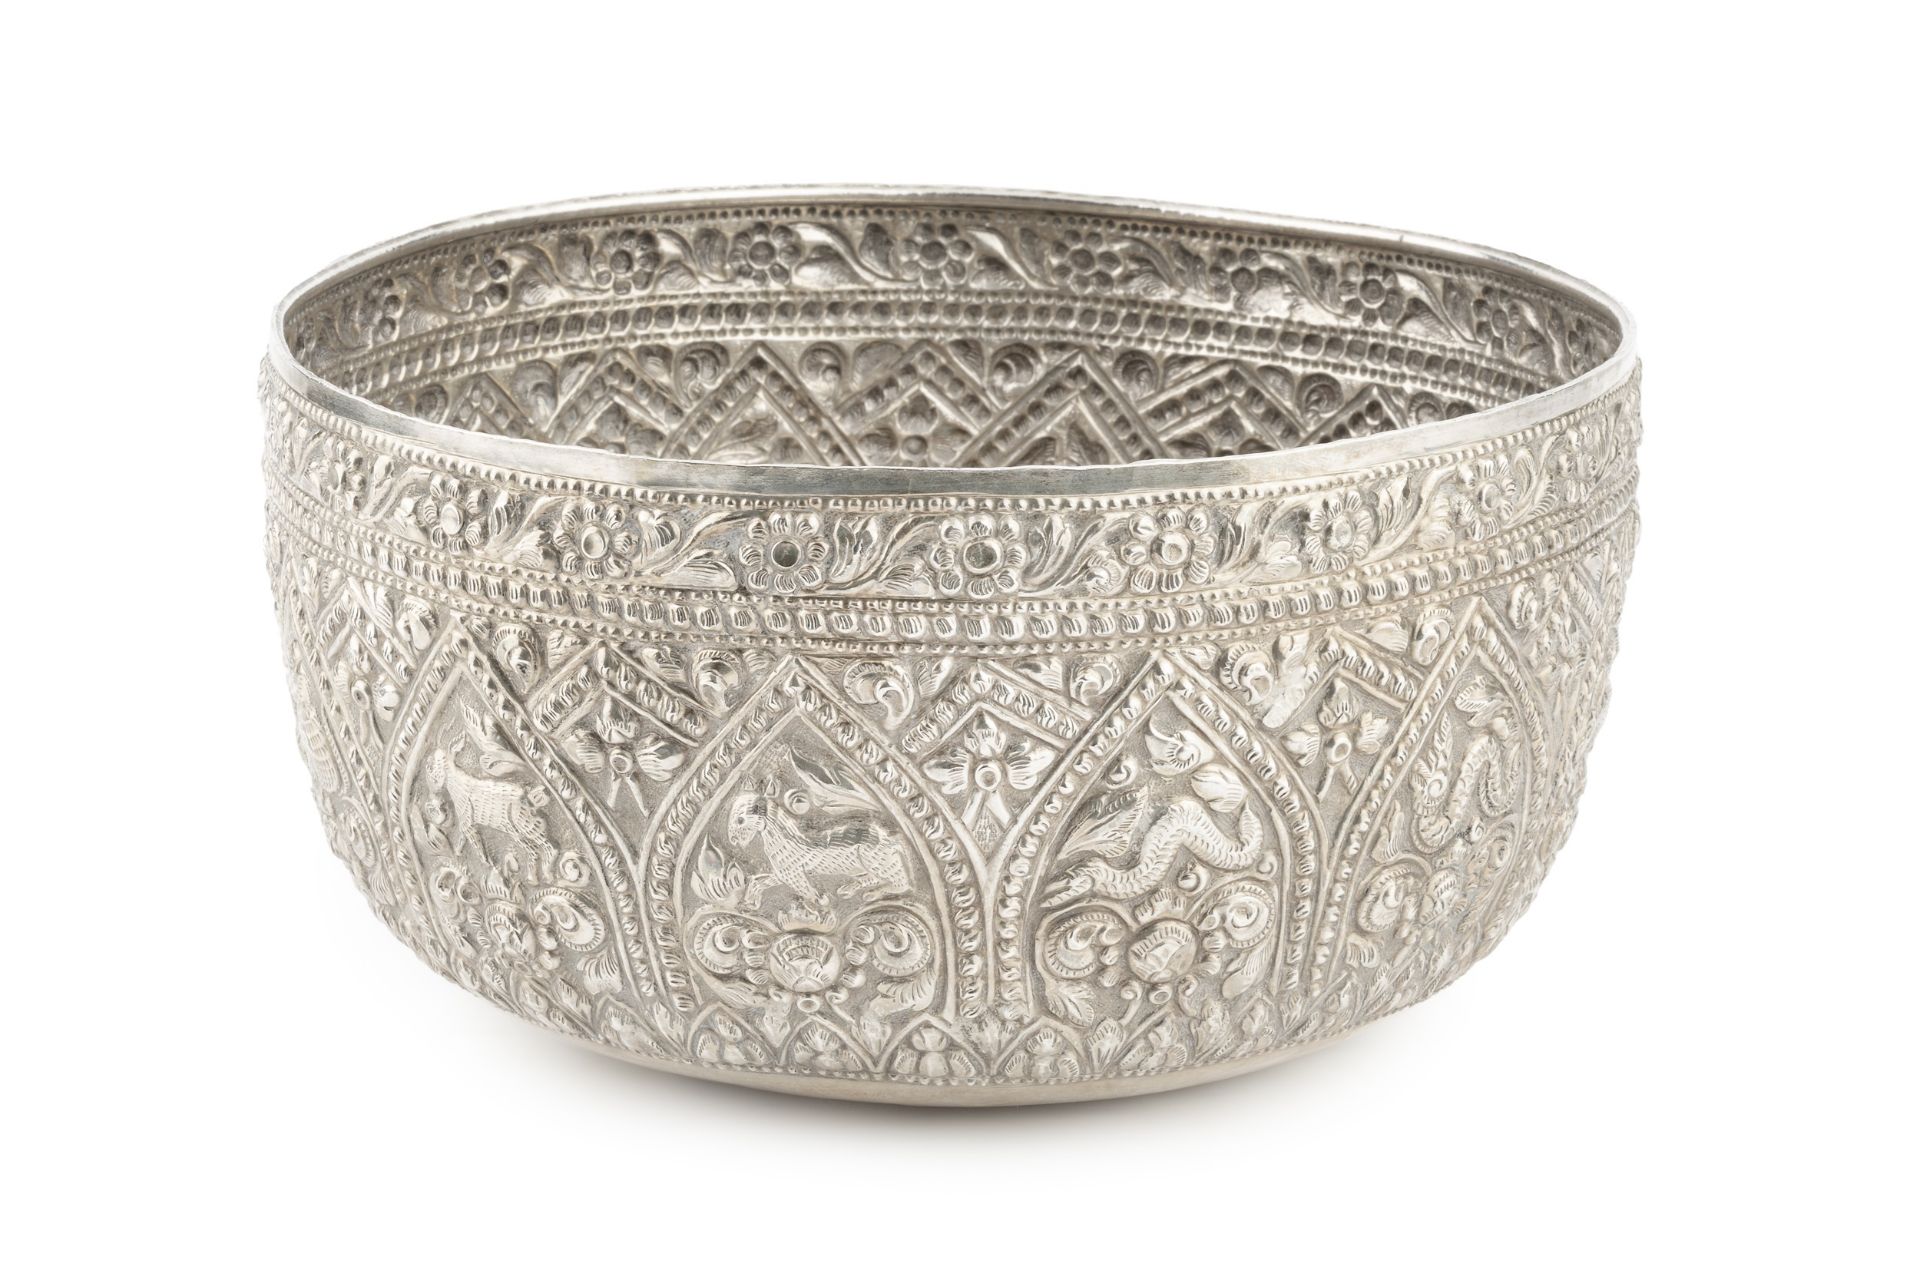 A Burmese white metal thabeik bowl, embossed and engraved with numerous animals and stylised foliage